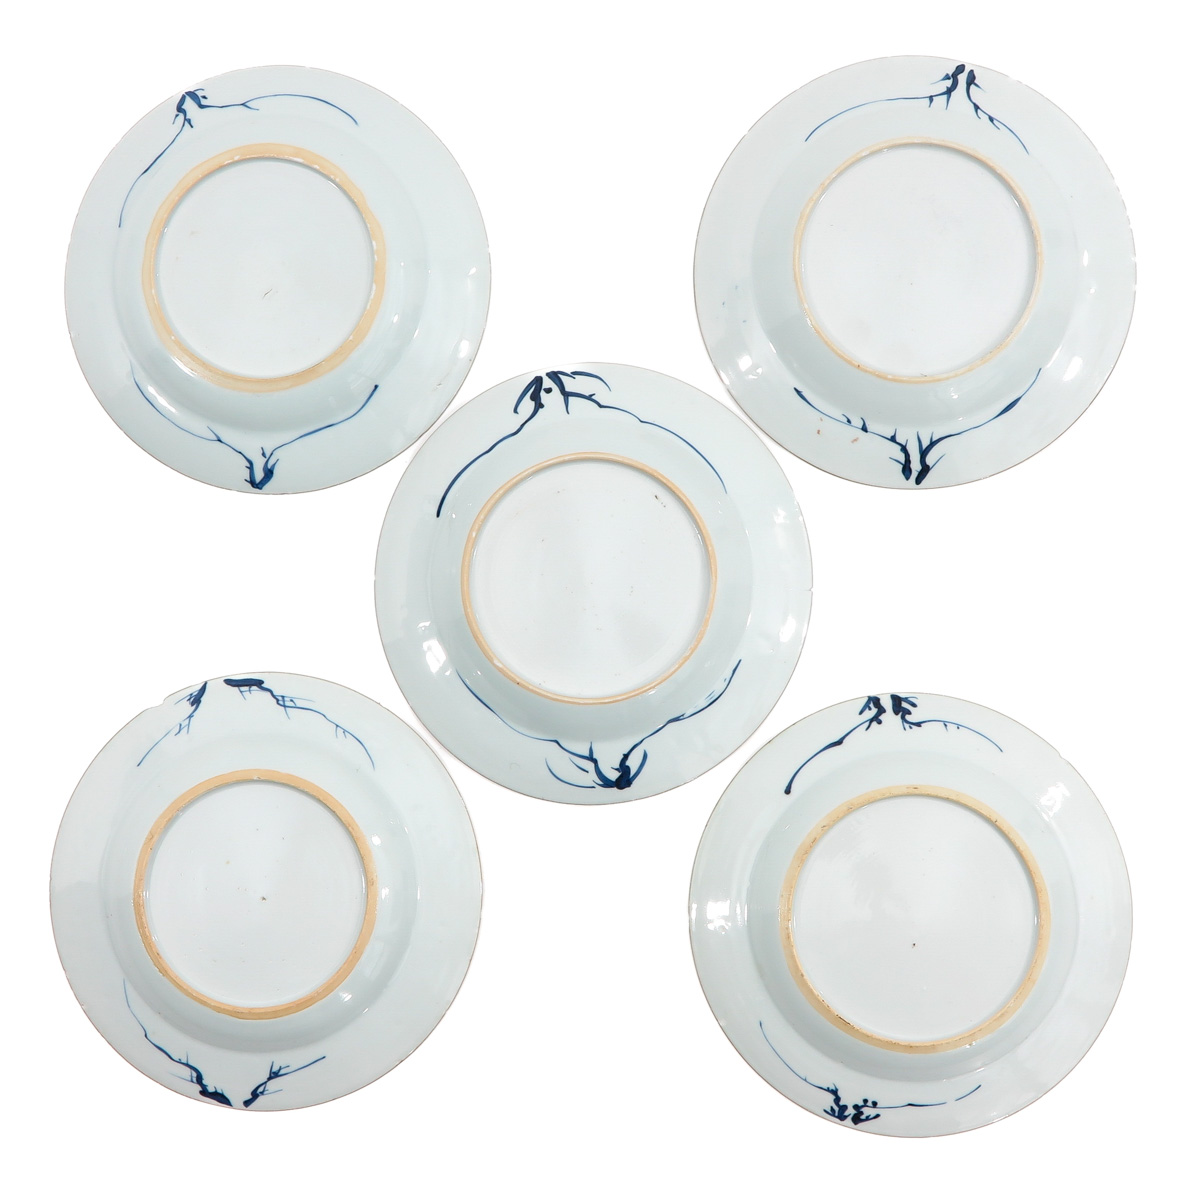 A Series of 5 Blue and White Plates - Image 2 of 10